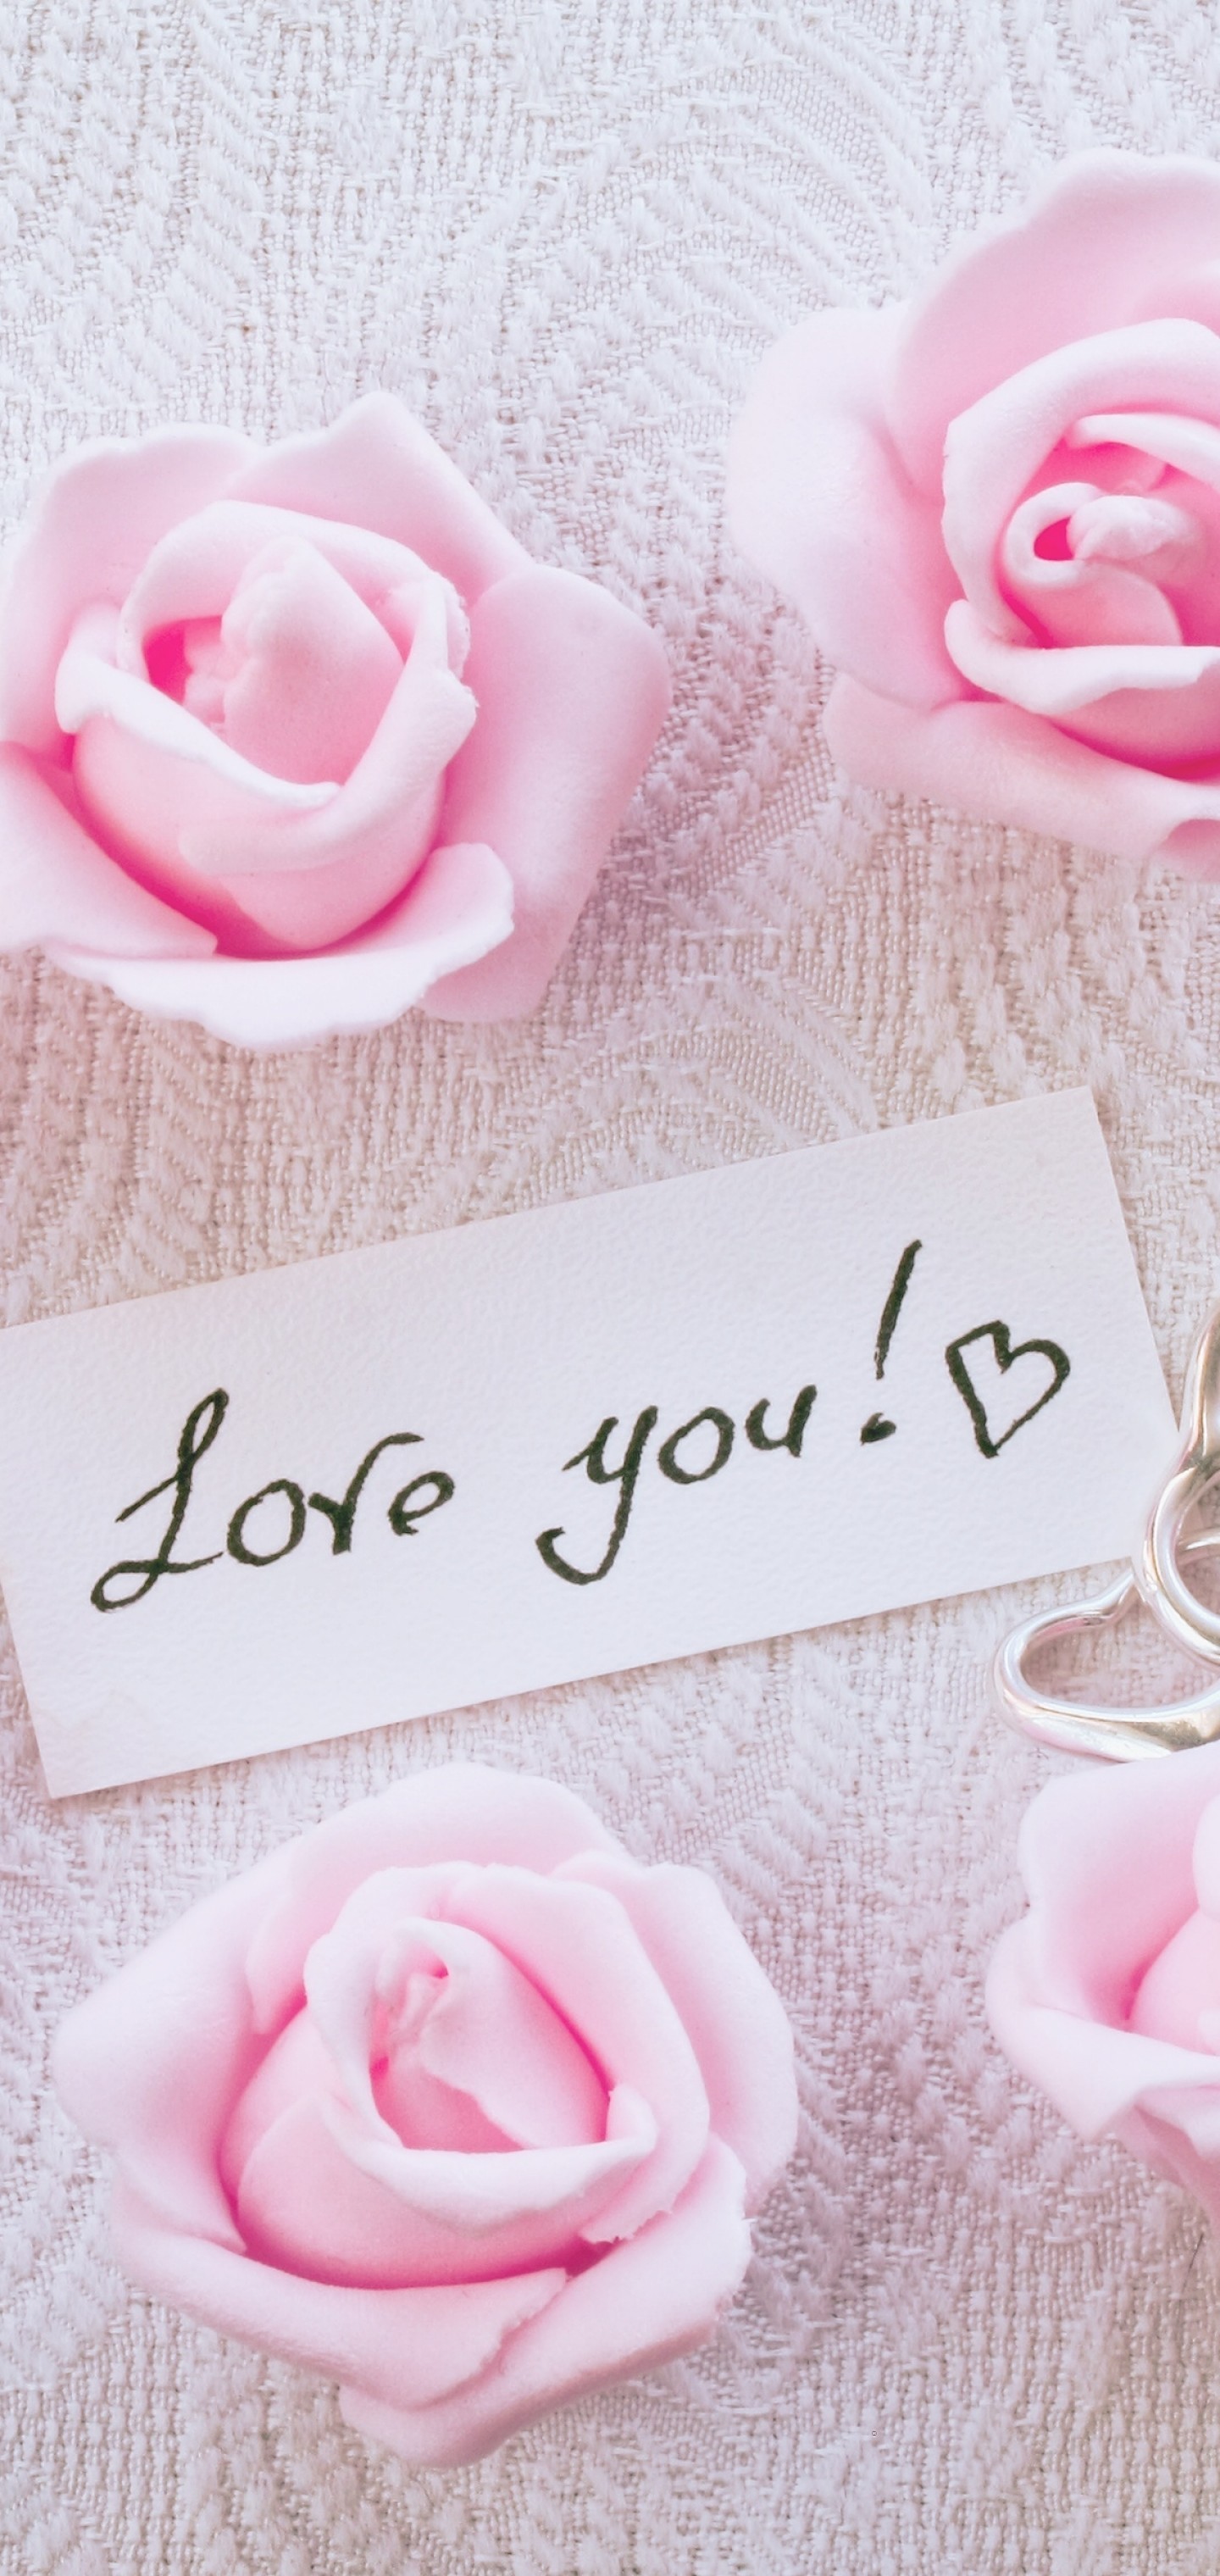 Pink Roses, Love You, Letter - Rose Pink I Love You , HD Wallpaper & Backgrounds